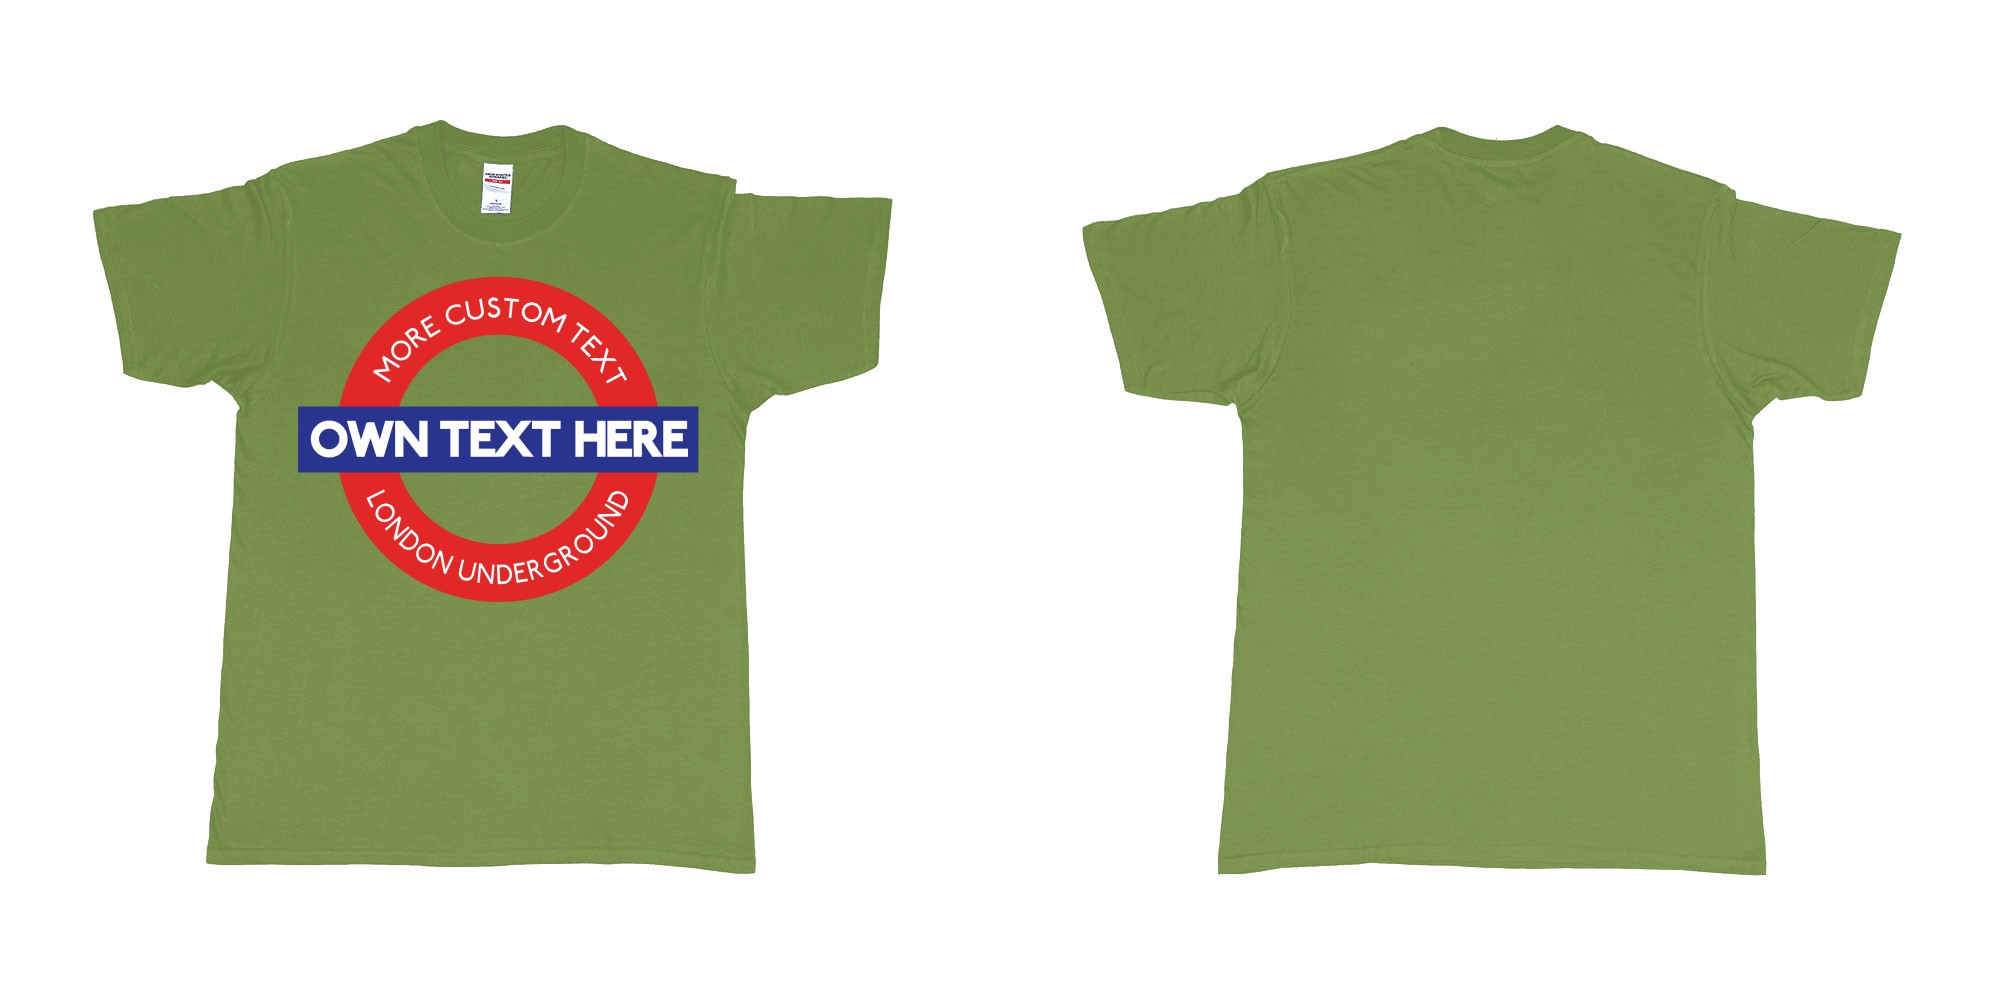 Custom tshirt design london underground logo custom design in fabric color military-green choice your own text made in Bali by The Pirate Way